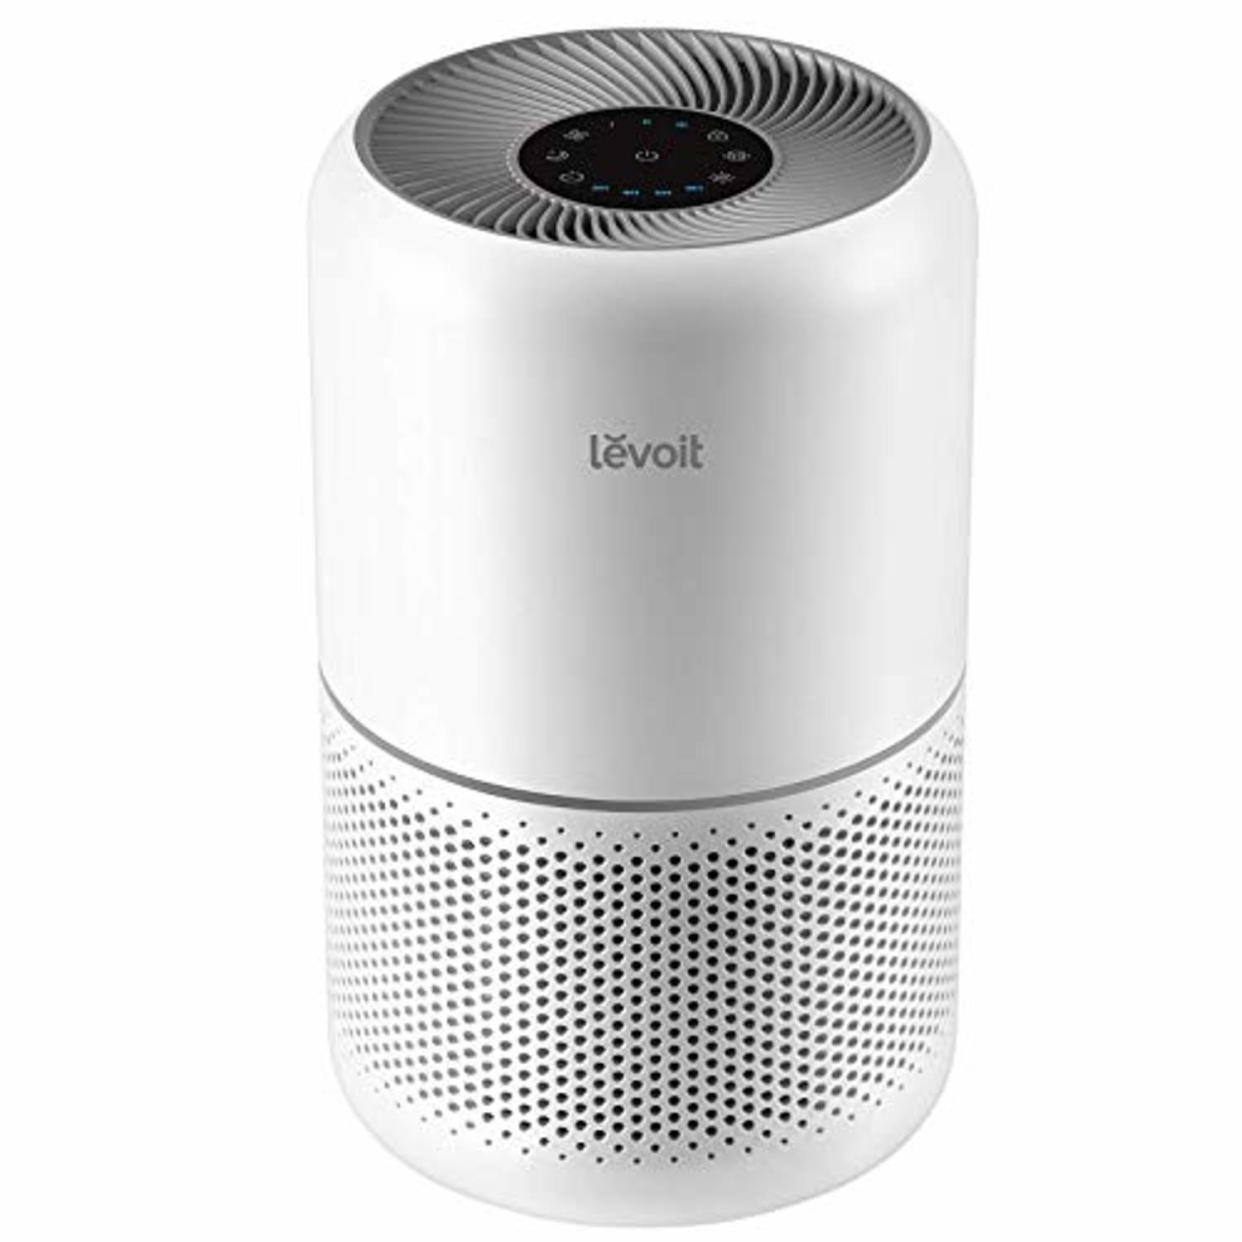 LEVOIT Air Purifier for Home Allergies Pets Hair in Bedroom, Covers Up to 1095 Sq.Foot Powered by 45W High Torque Motor, 3-in-1 Filter, Remove Dust Smoke Pollutants Odor, Core 300, White (AMAZON)